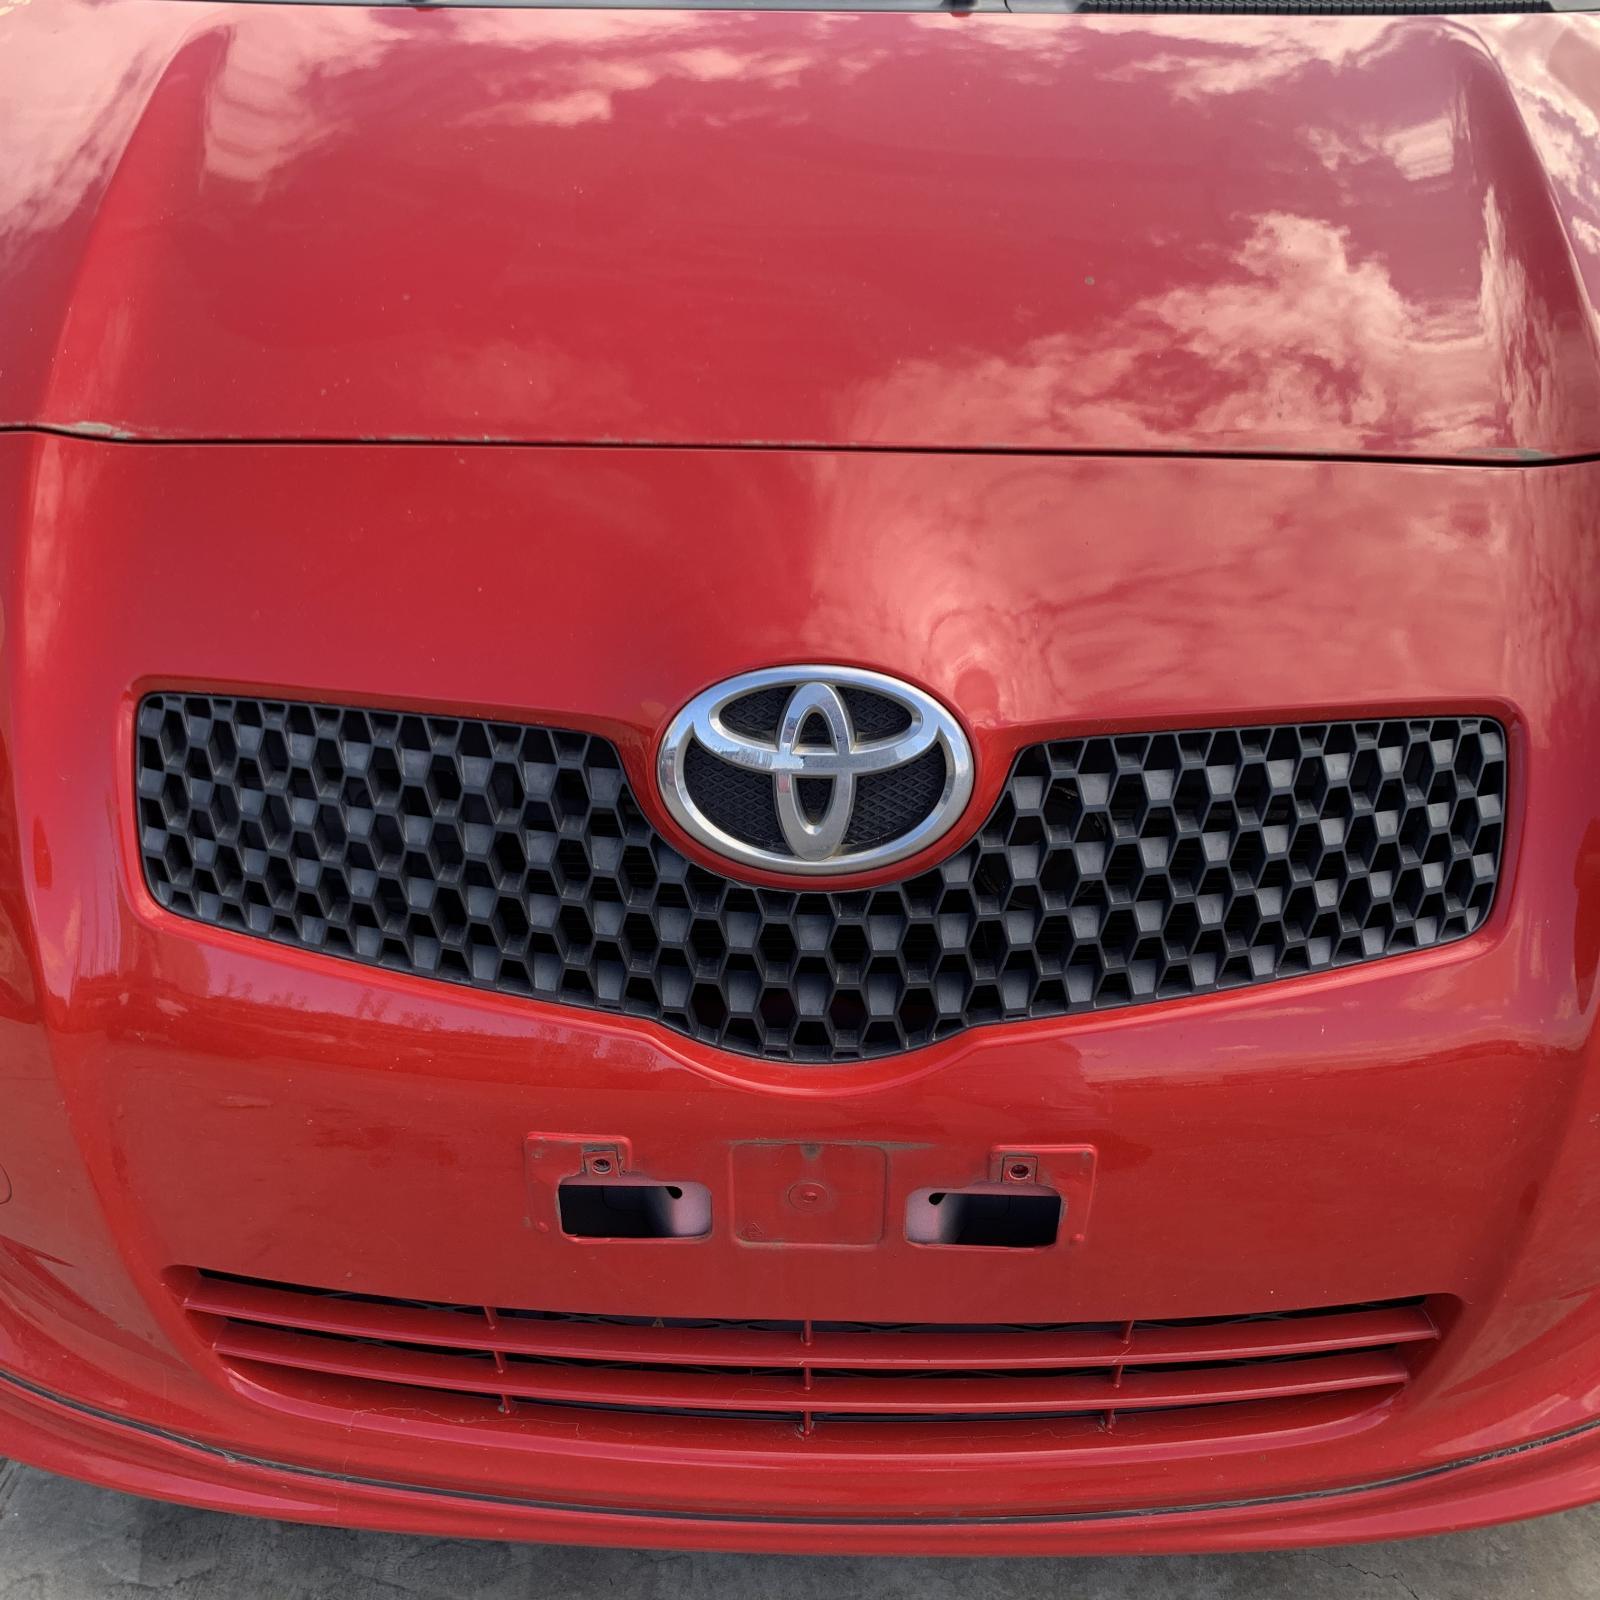 TOYOTA YARIS, Grille, RADIATOR GRILLE, NCP9#, HATCH, 10/05-09/08 (AUS ONLY)